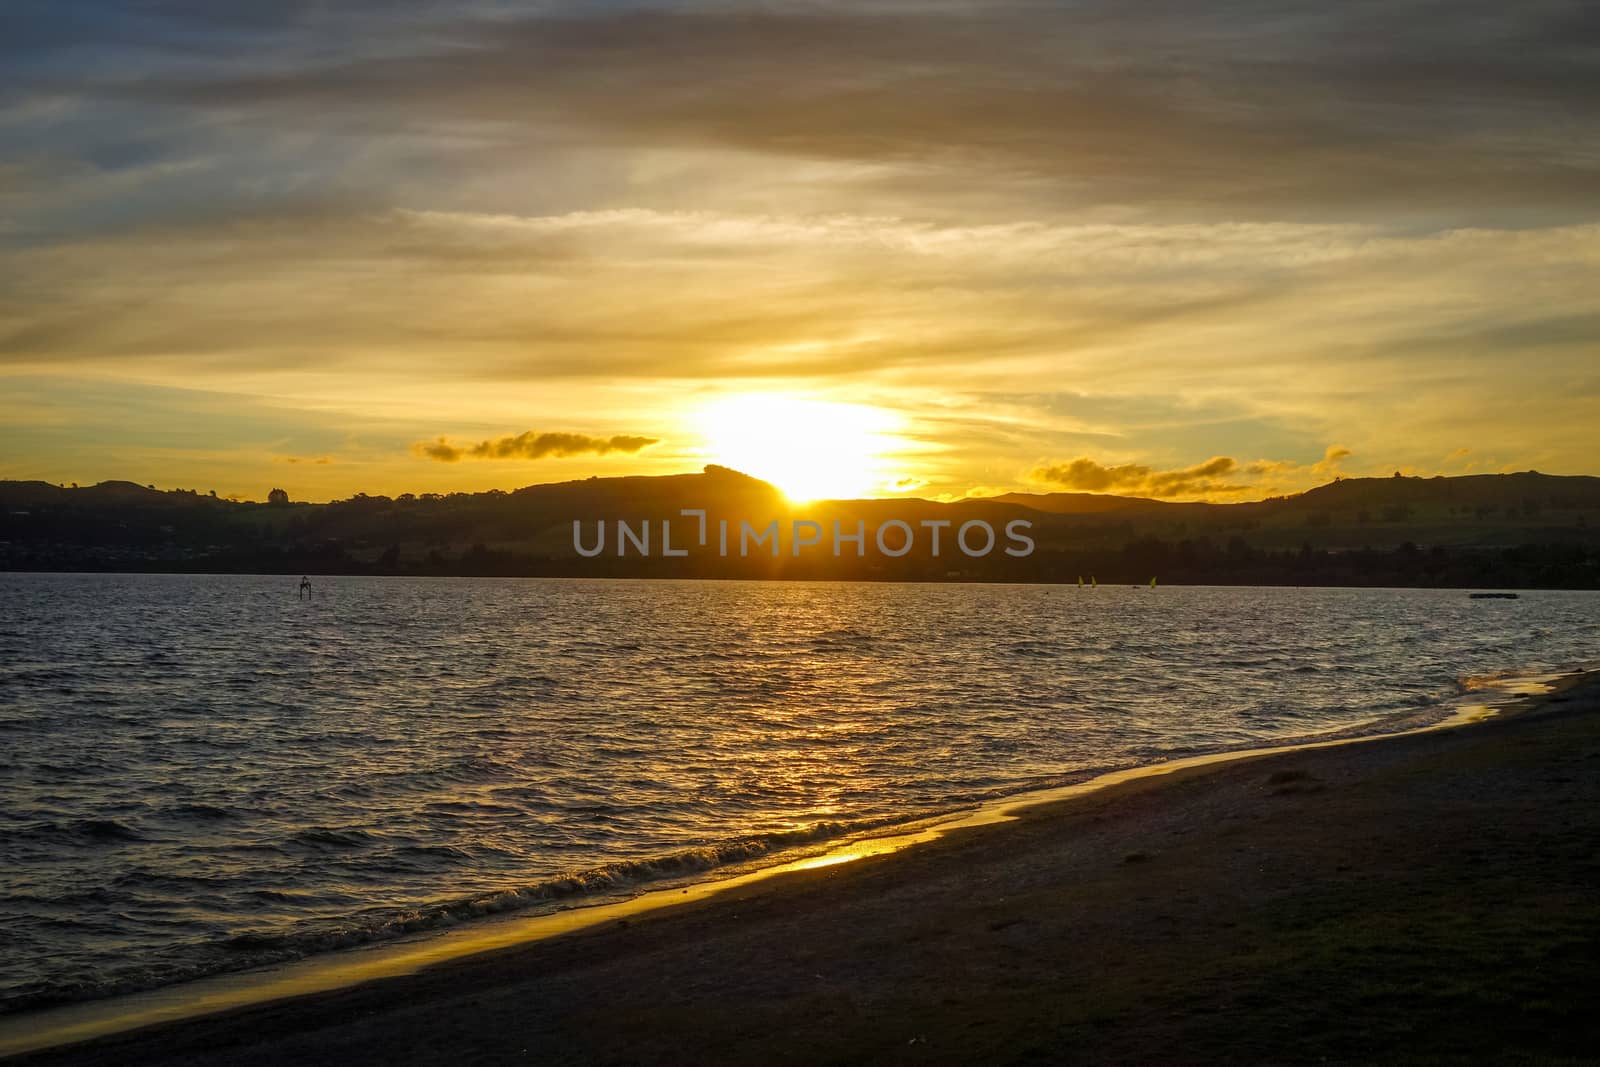 Taupo Lake at sunset, New Zealand by daboost